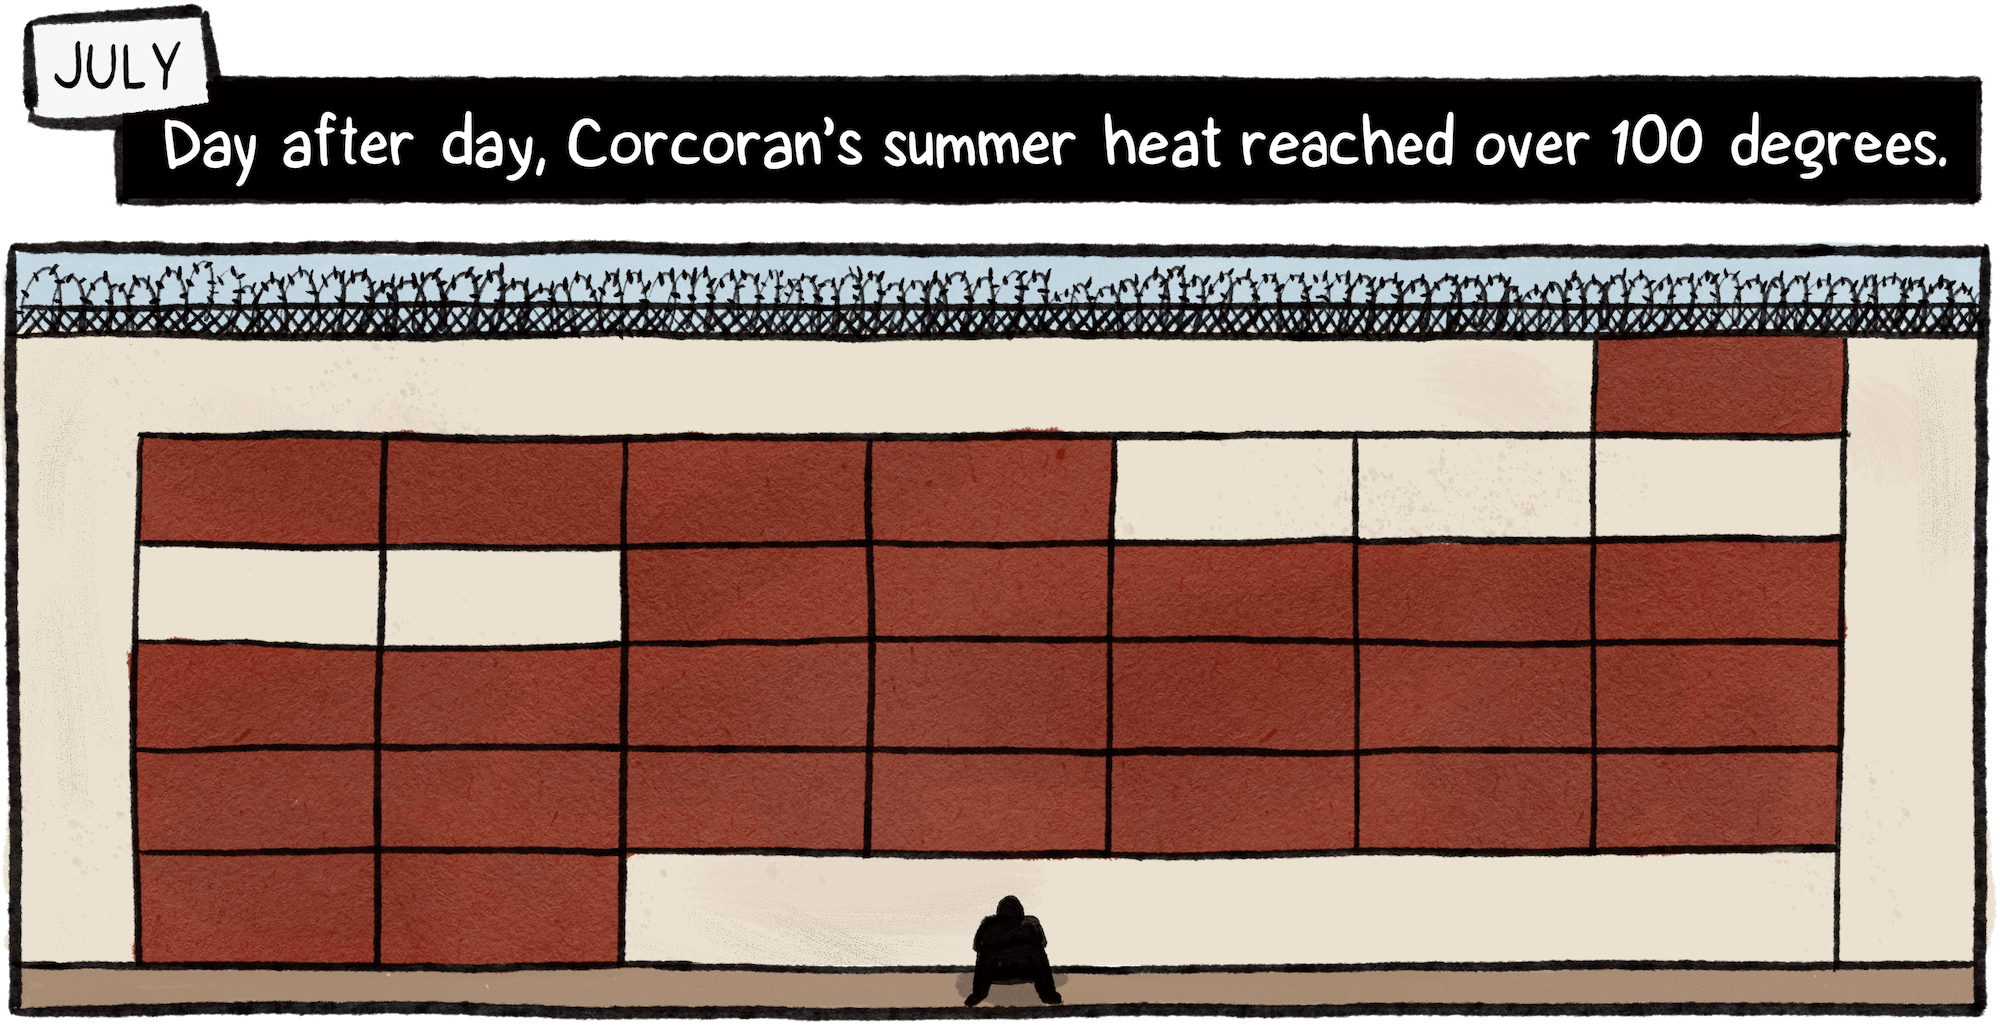 Concern turned from one climate threat to another. In July, summer heat plateaued over 100 degrees for weeks. A silhouetted figure sits in front of a wall with barbed wire. On the wall, a calendar shows only five days which were lower than 100 degrees.